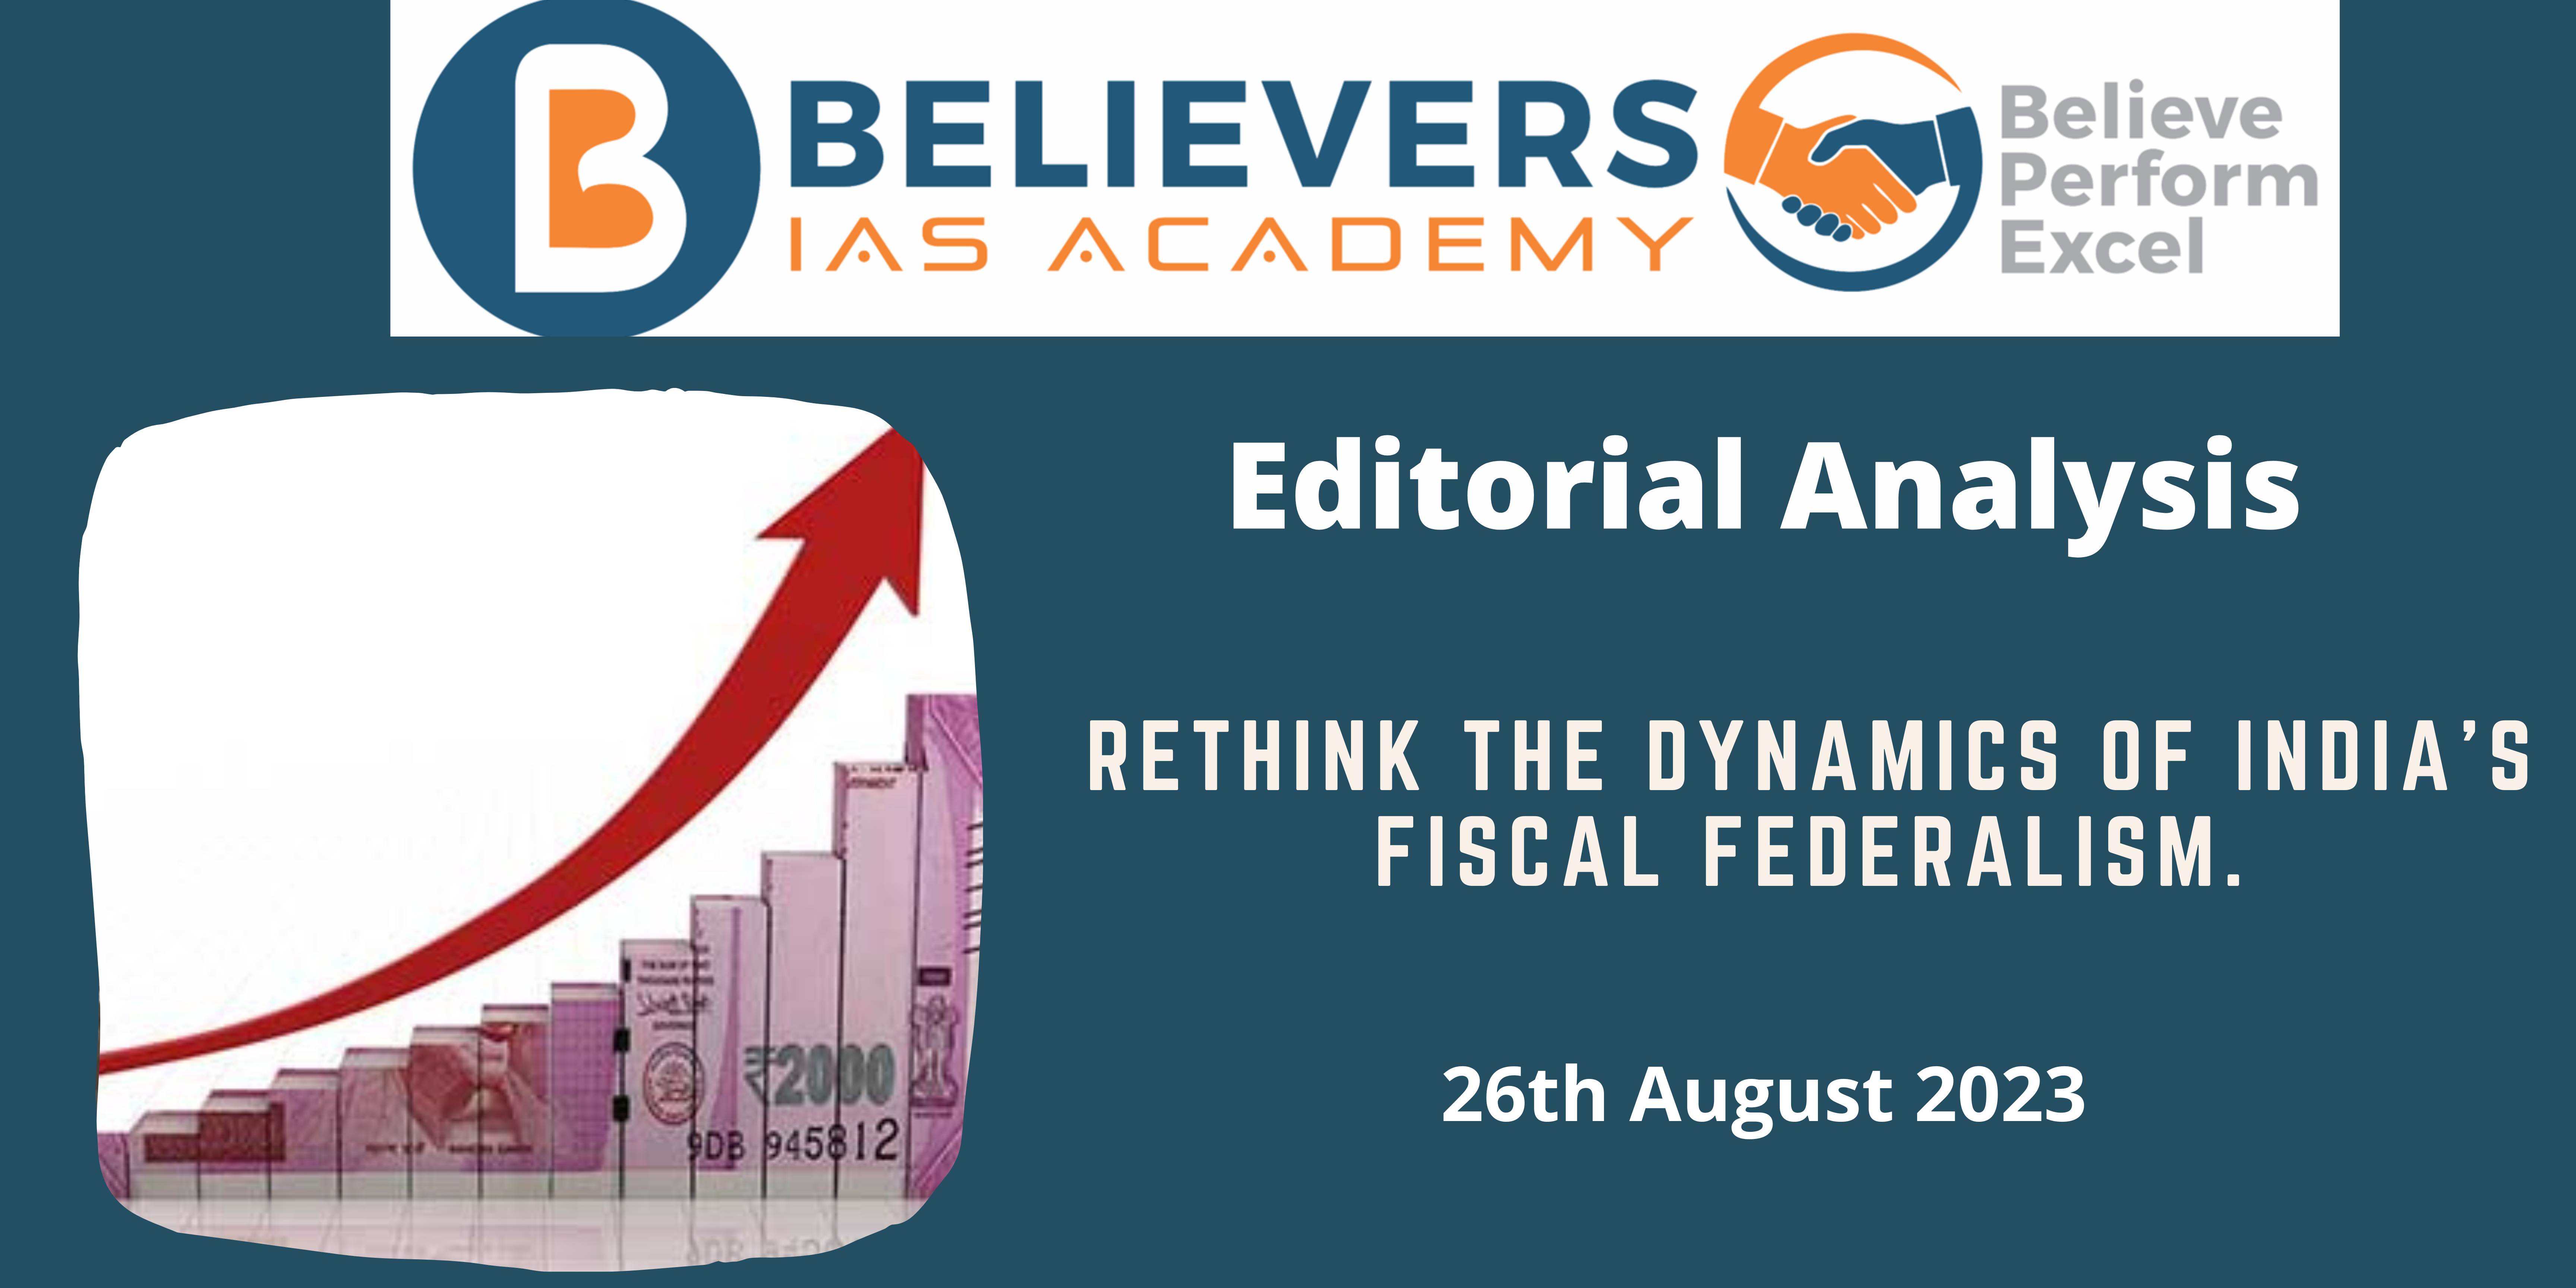 Rethink the dynamics of India’s fiscal federalism